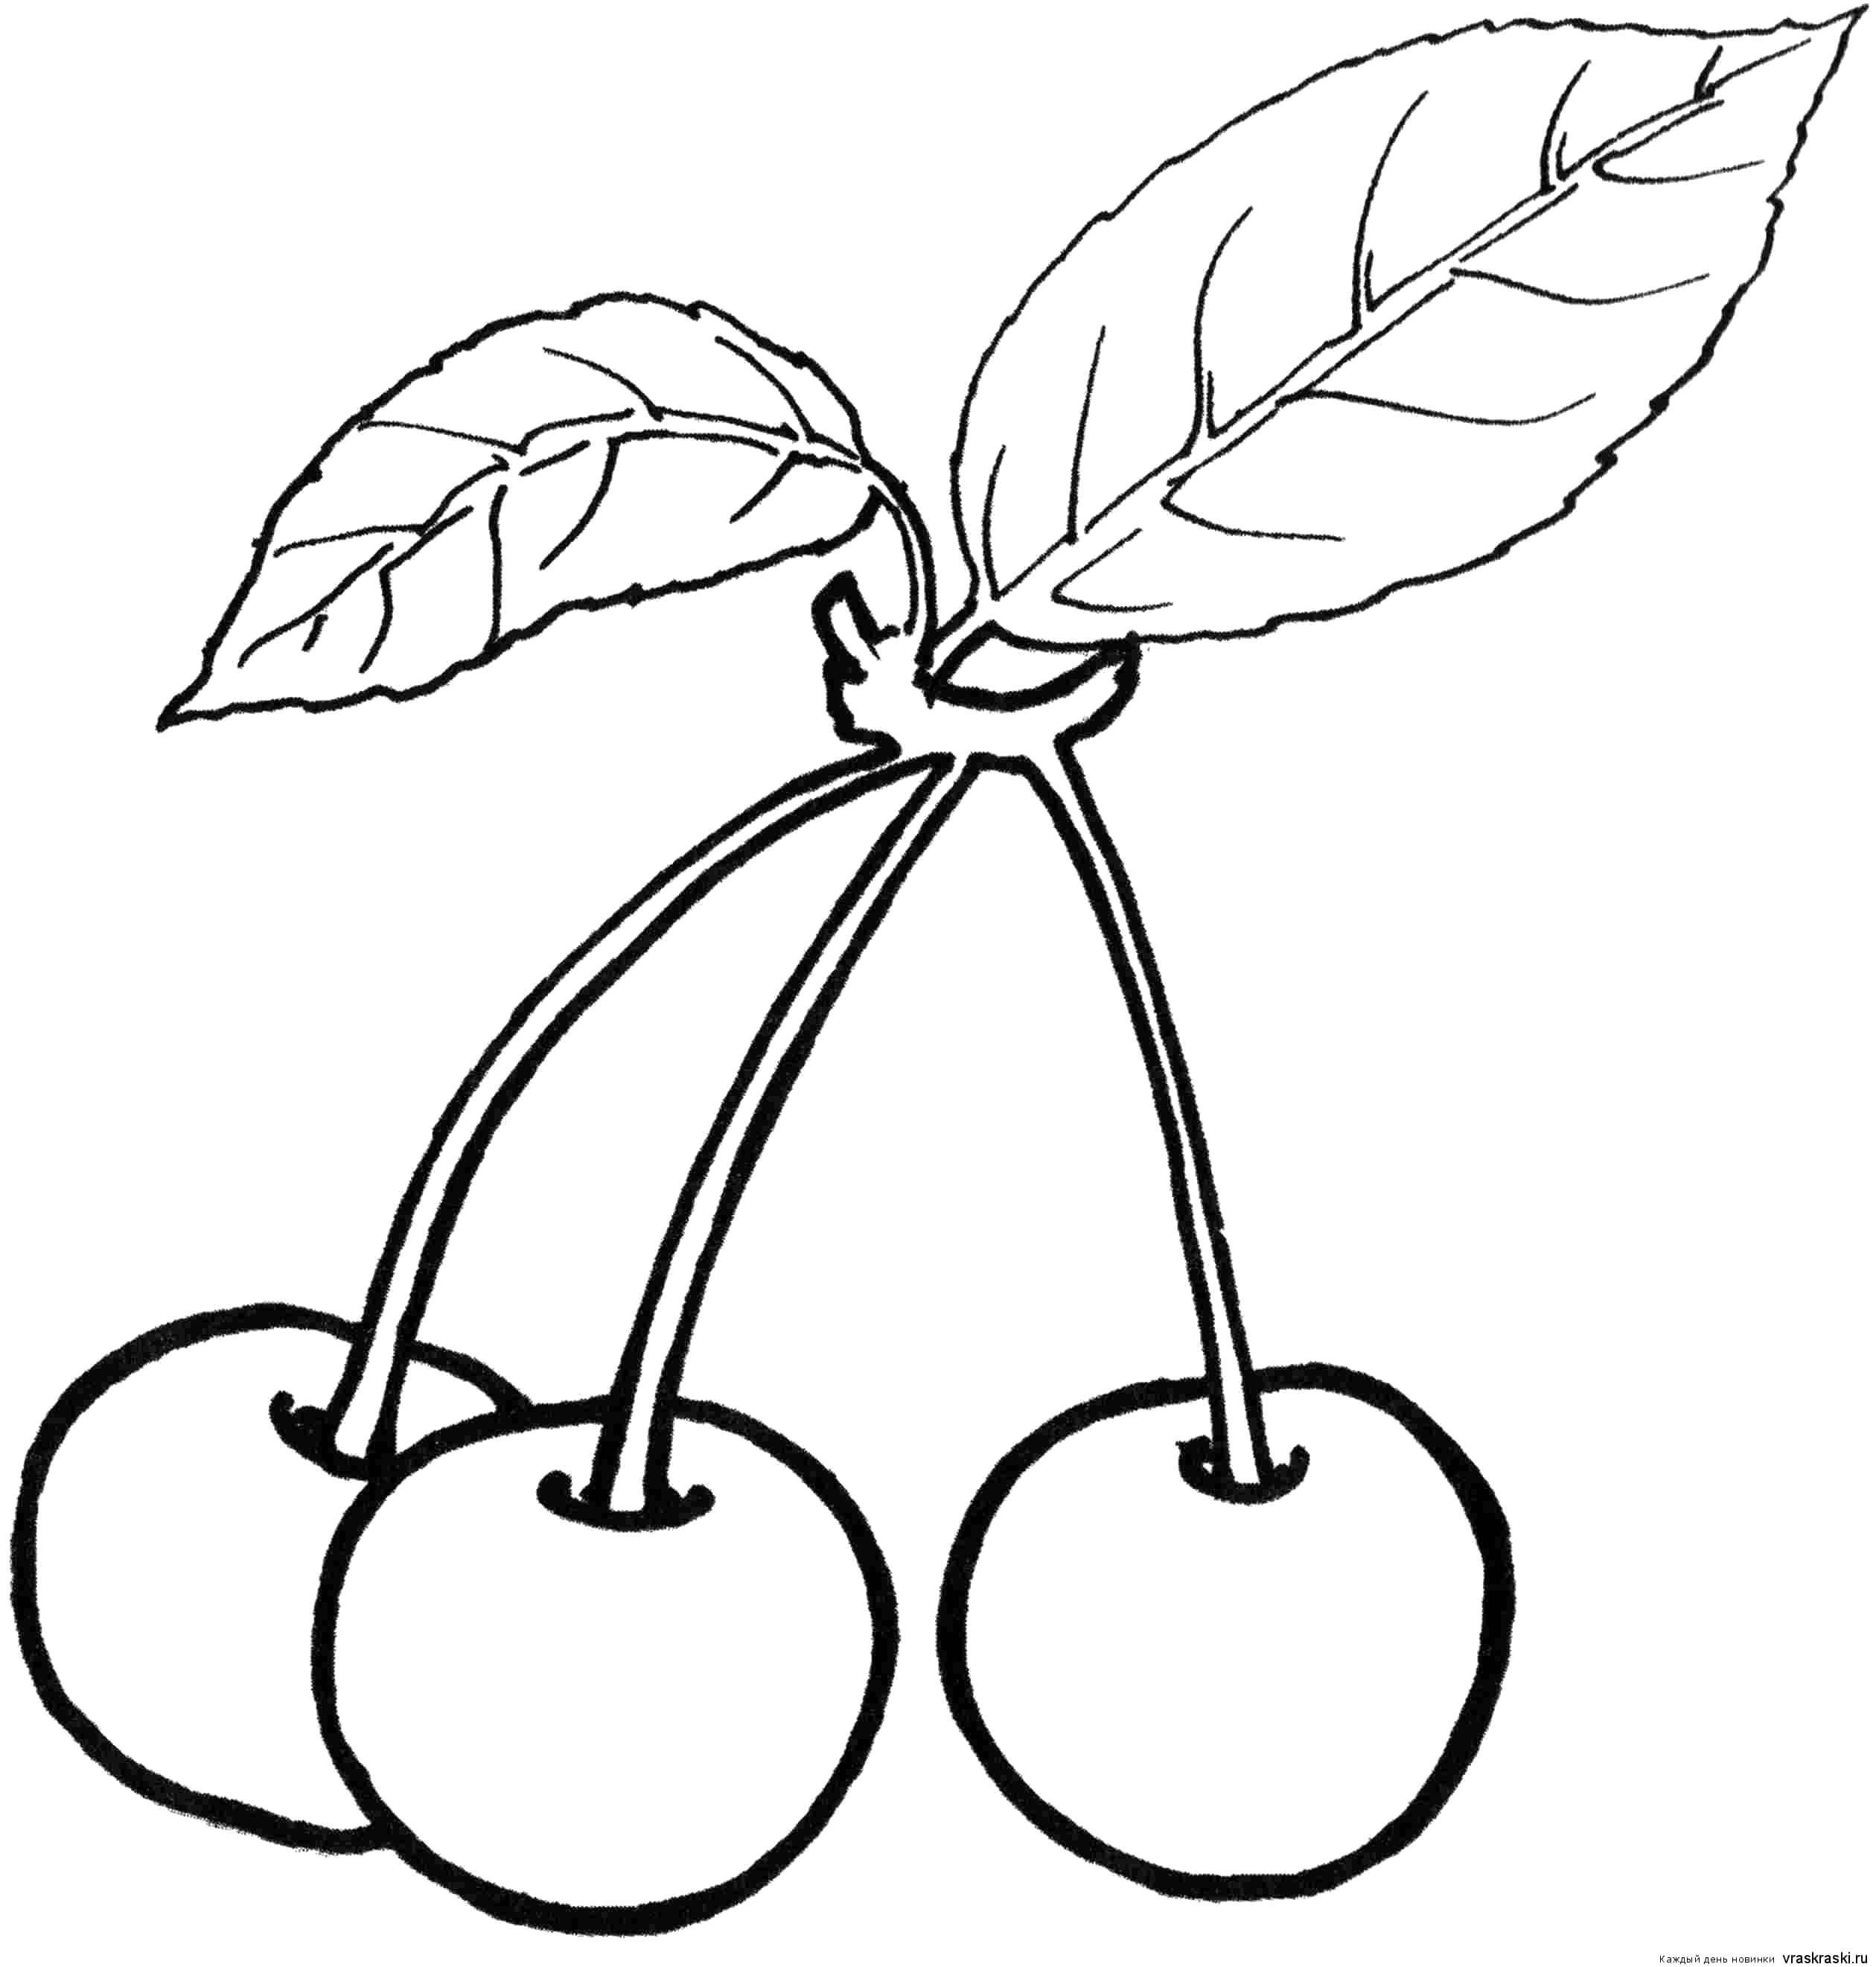 Coloring Three cherries and leaf. Category Coloring pages for kids. Tags:  Berries, cherry.